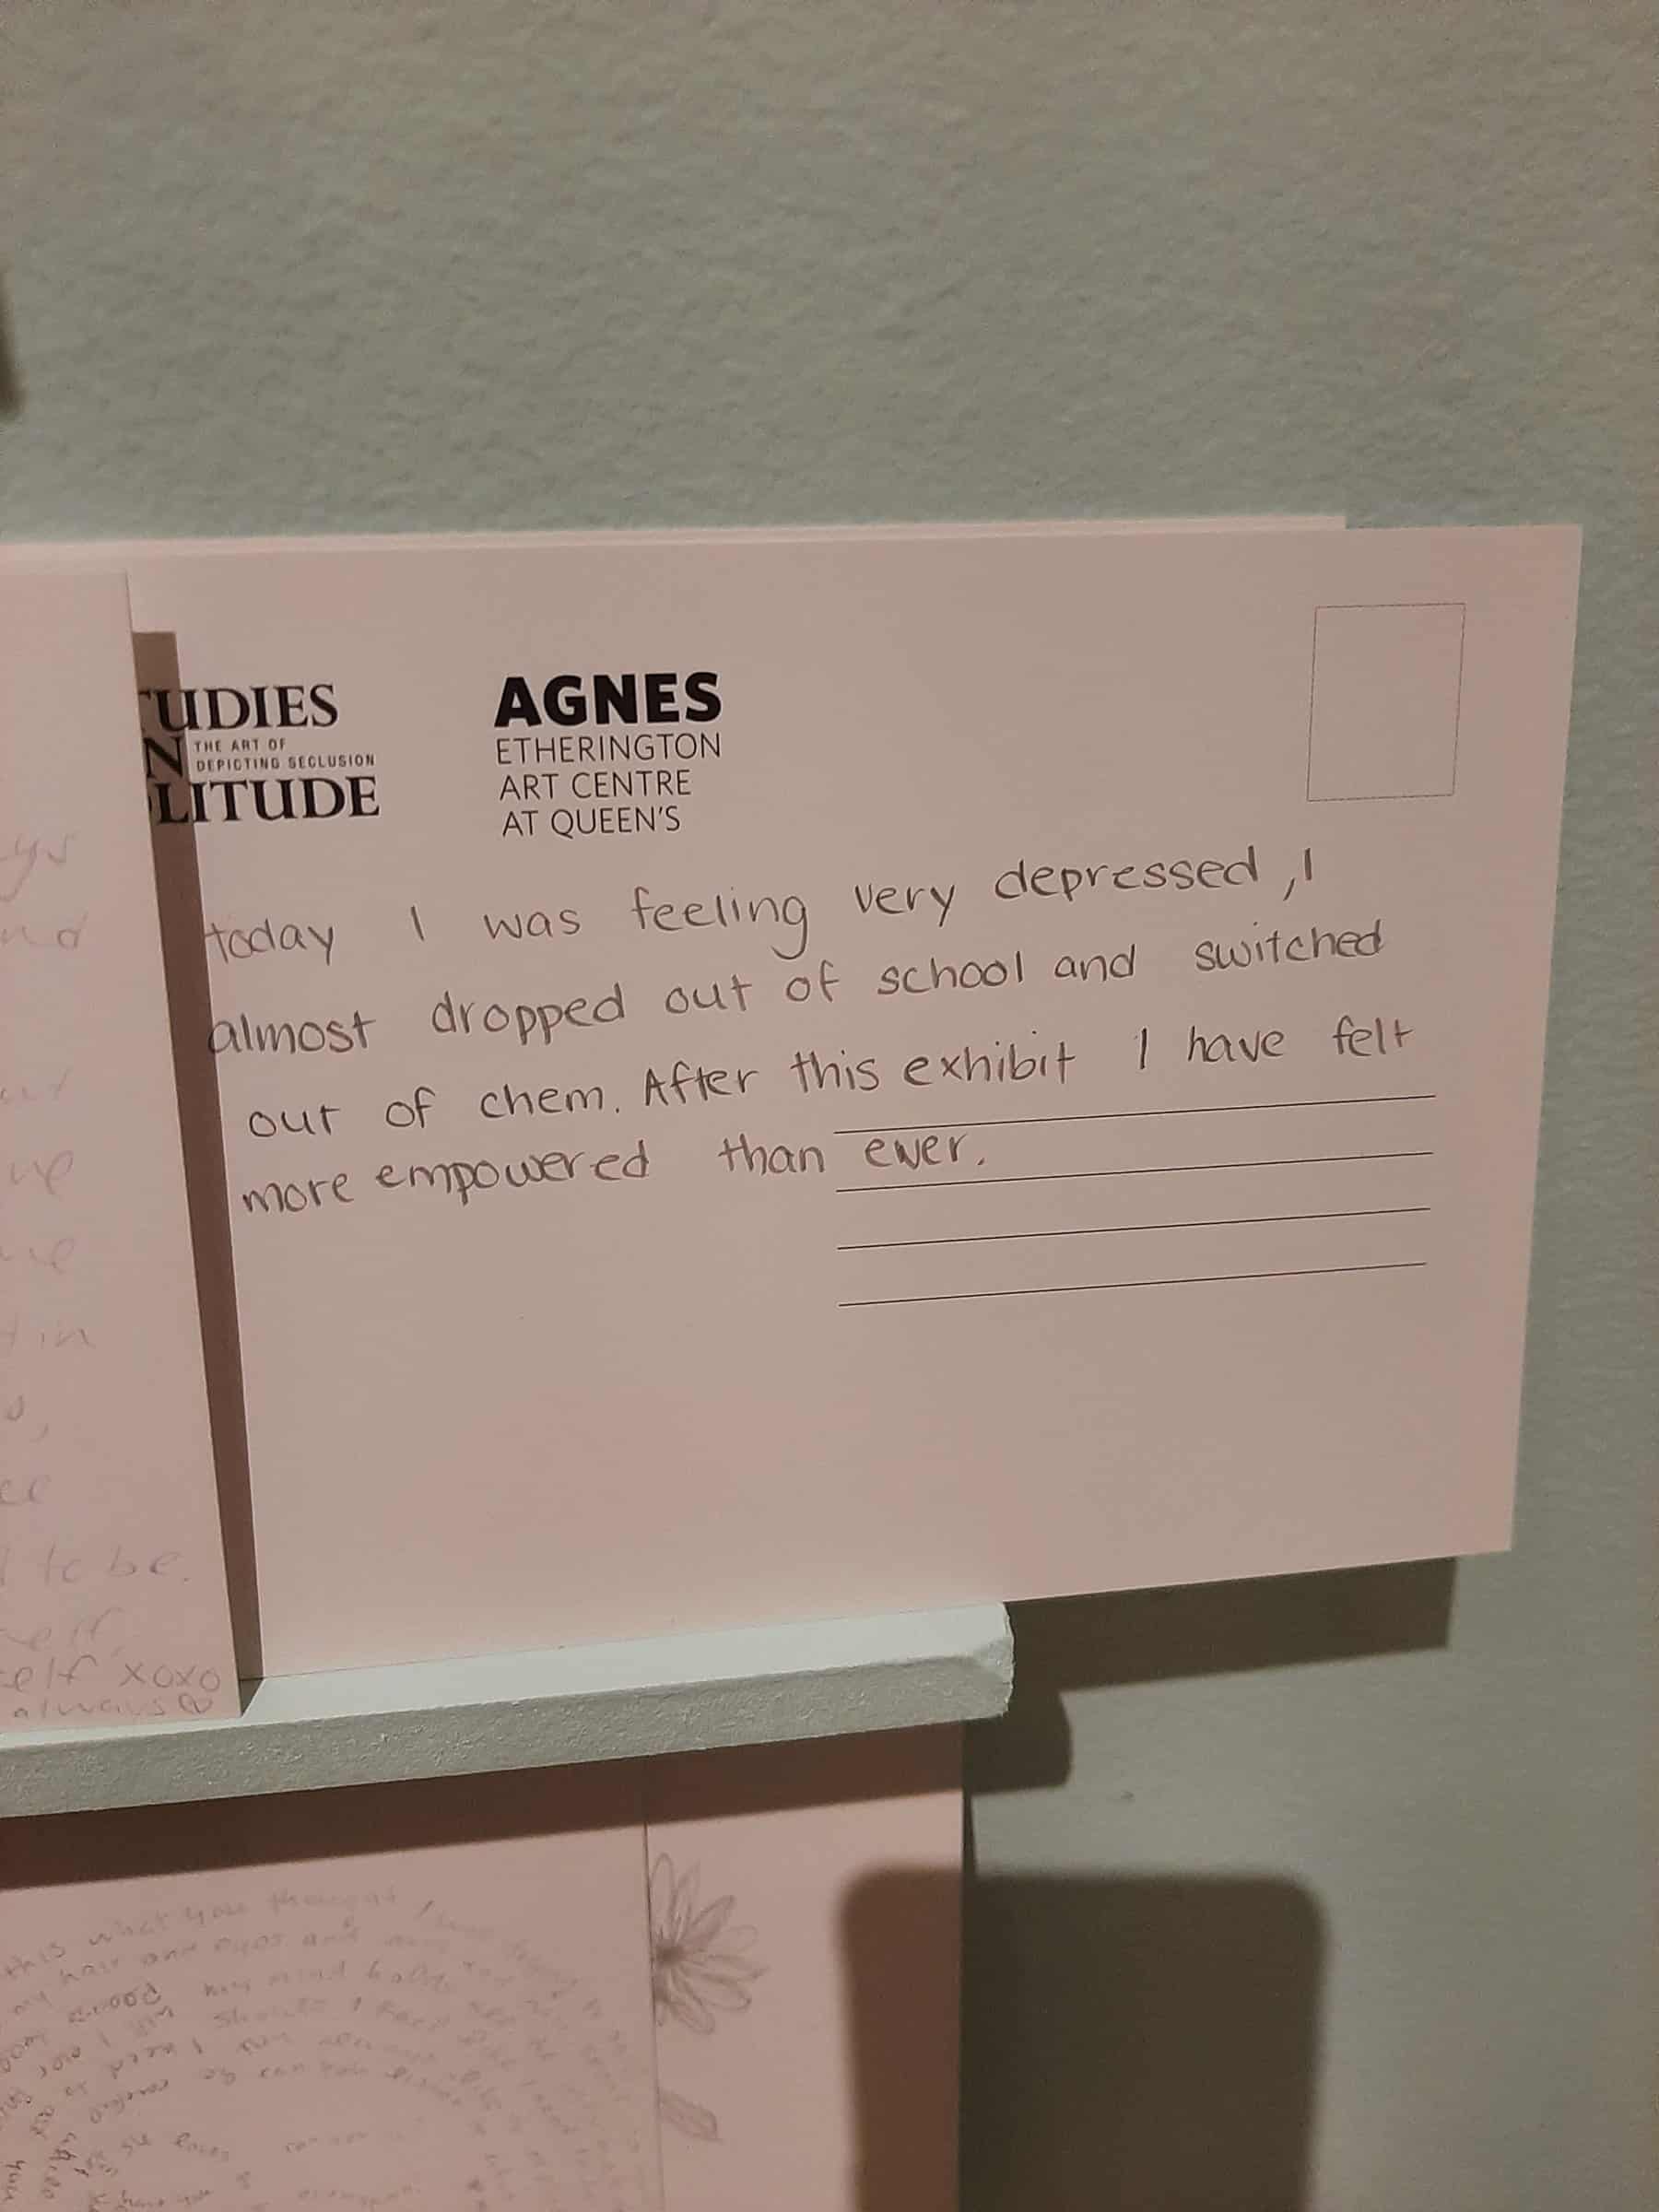 Postcard with text reading “Today I was feeling very depressed, I almost dropped out of school and switched out of chem. After this exhibit I have felt more empowered than ever.”